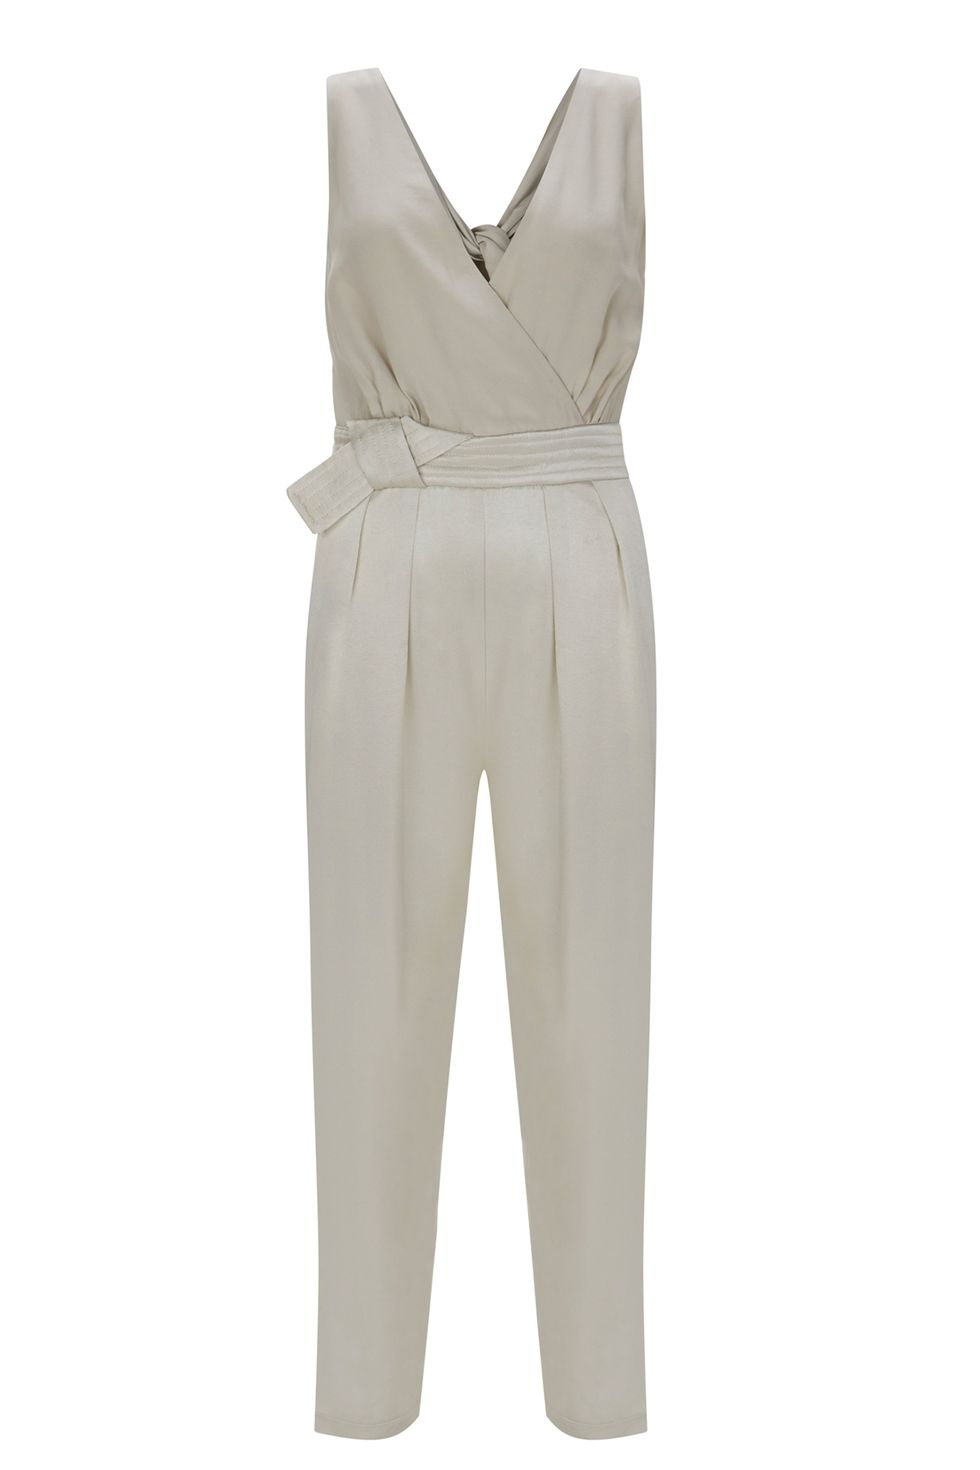 jumpsuits, how to wear a jumpsuit